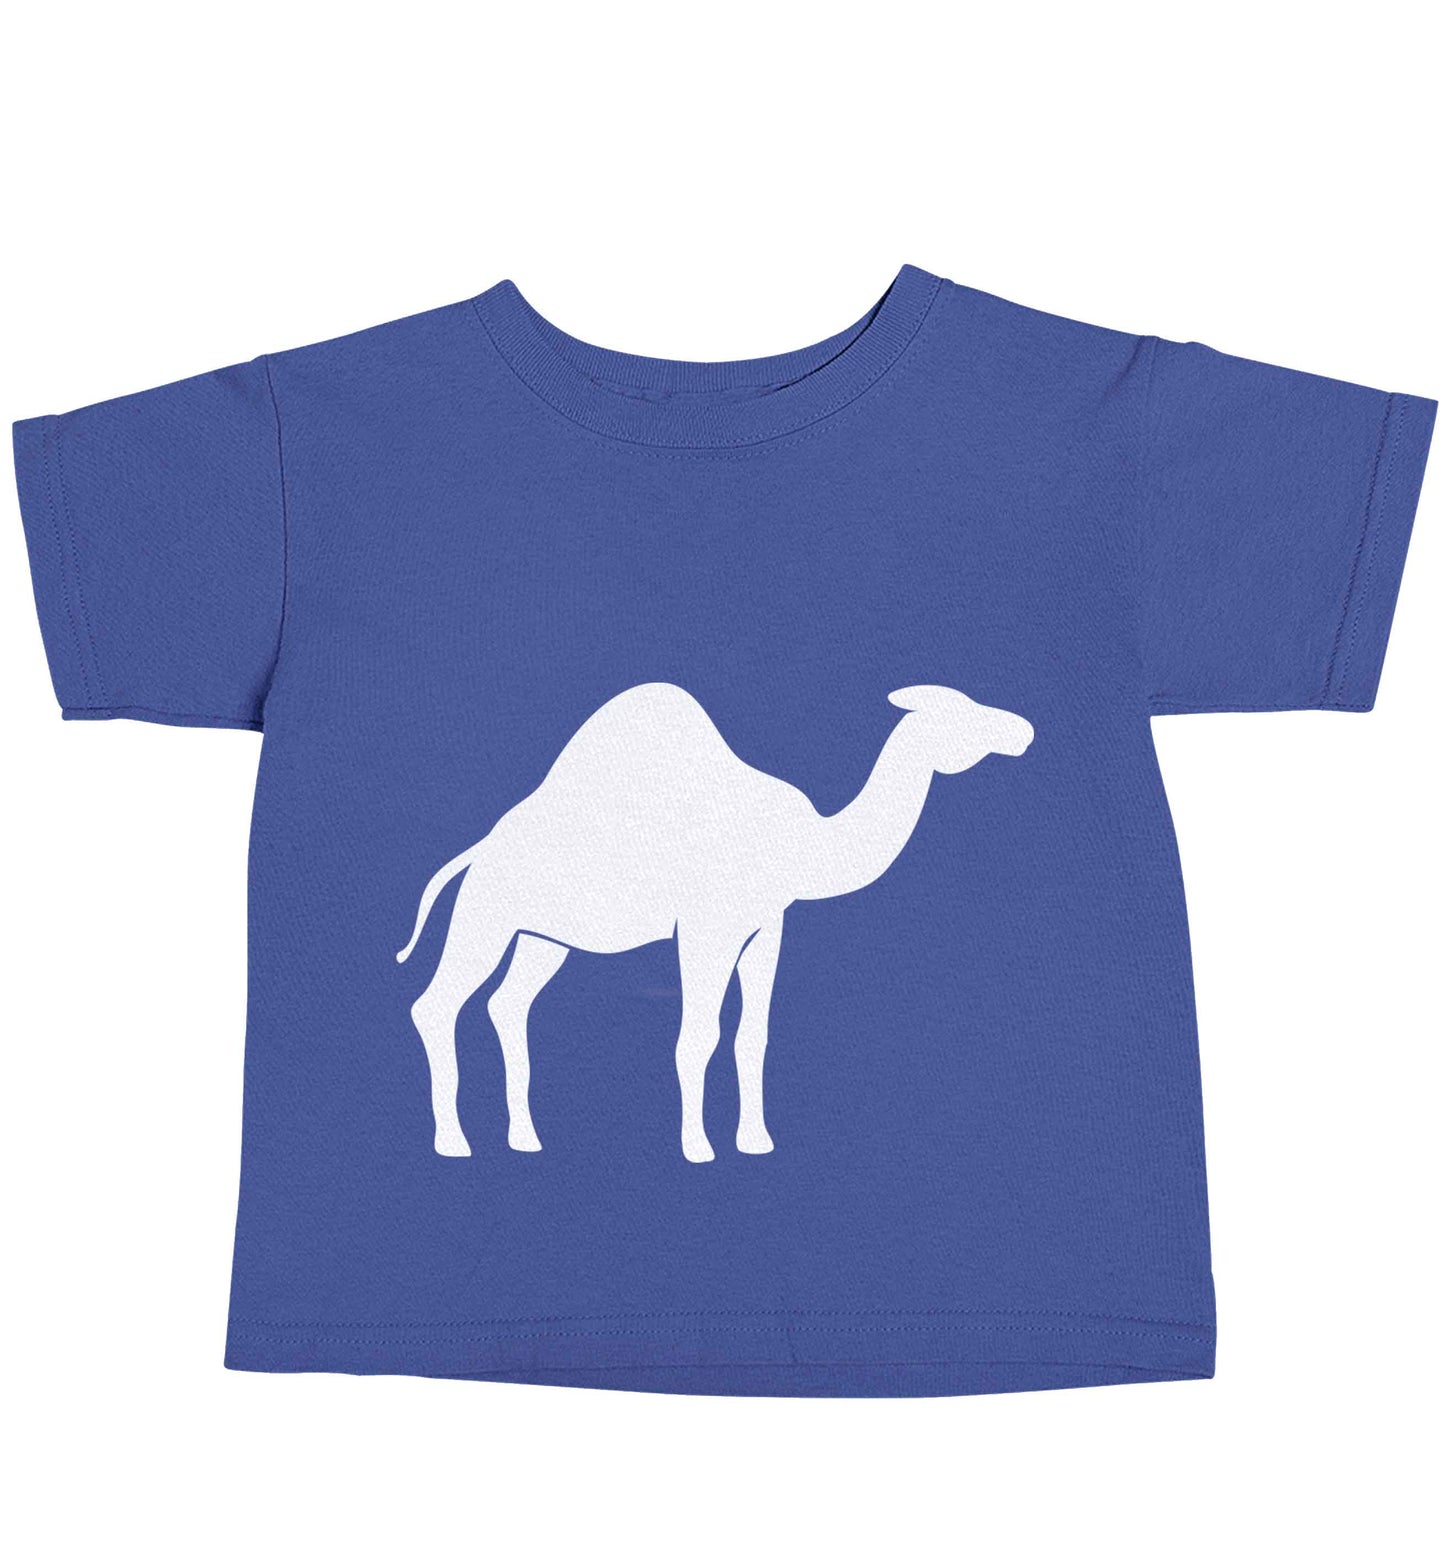 Blue camel blue baby toddler Tshirt 2 Years